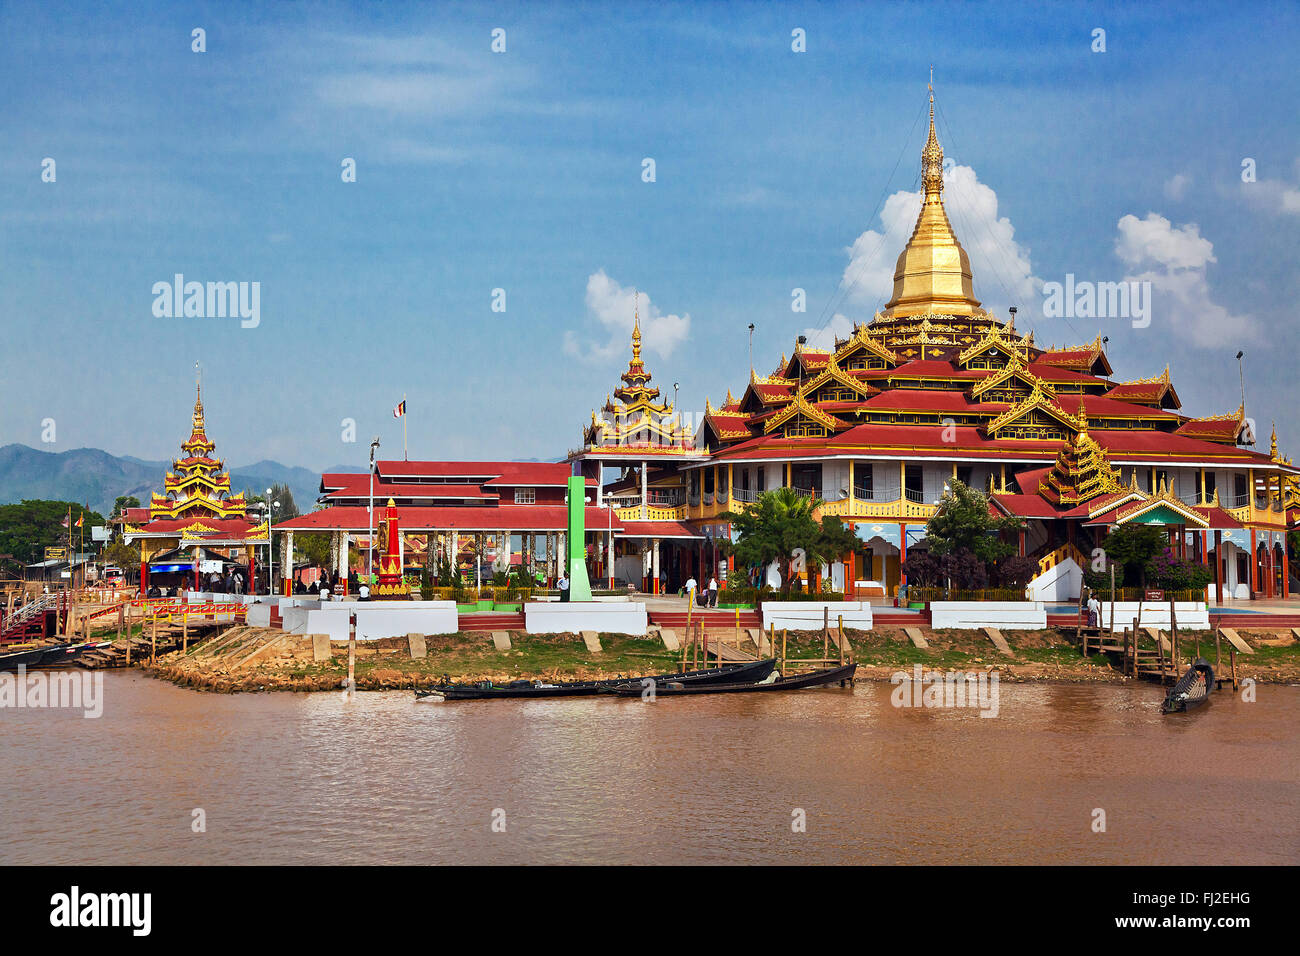 The TEMPLE of PHAUNG DAW OO PAYA is the holiest Buddhist site in SHAN STATE - INLE LAKE, MYANMAR Stock Photo